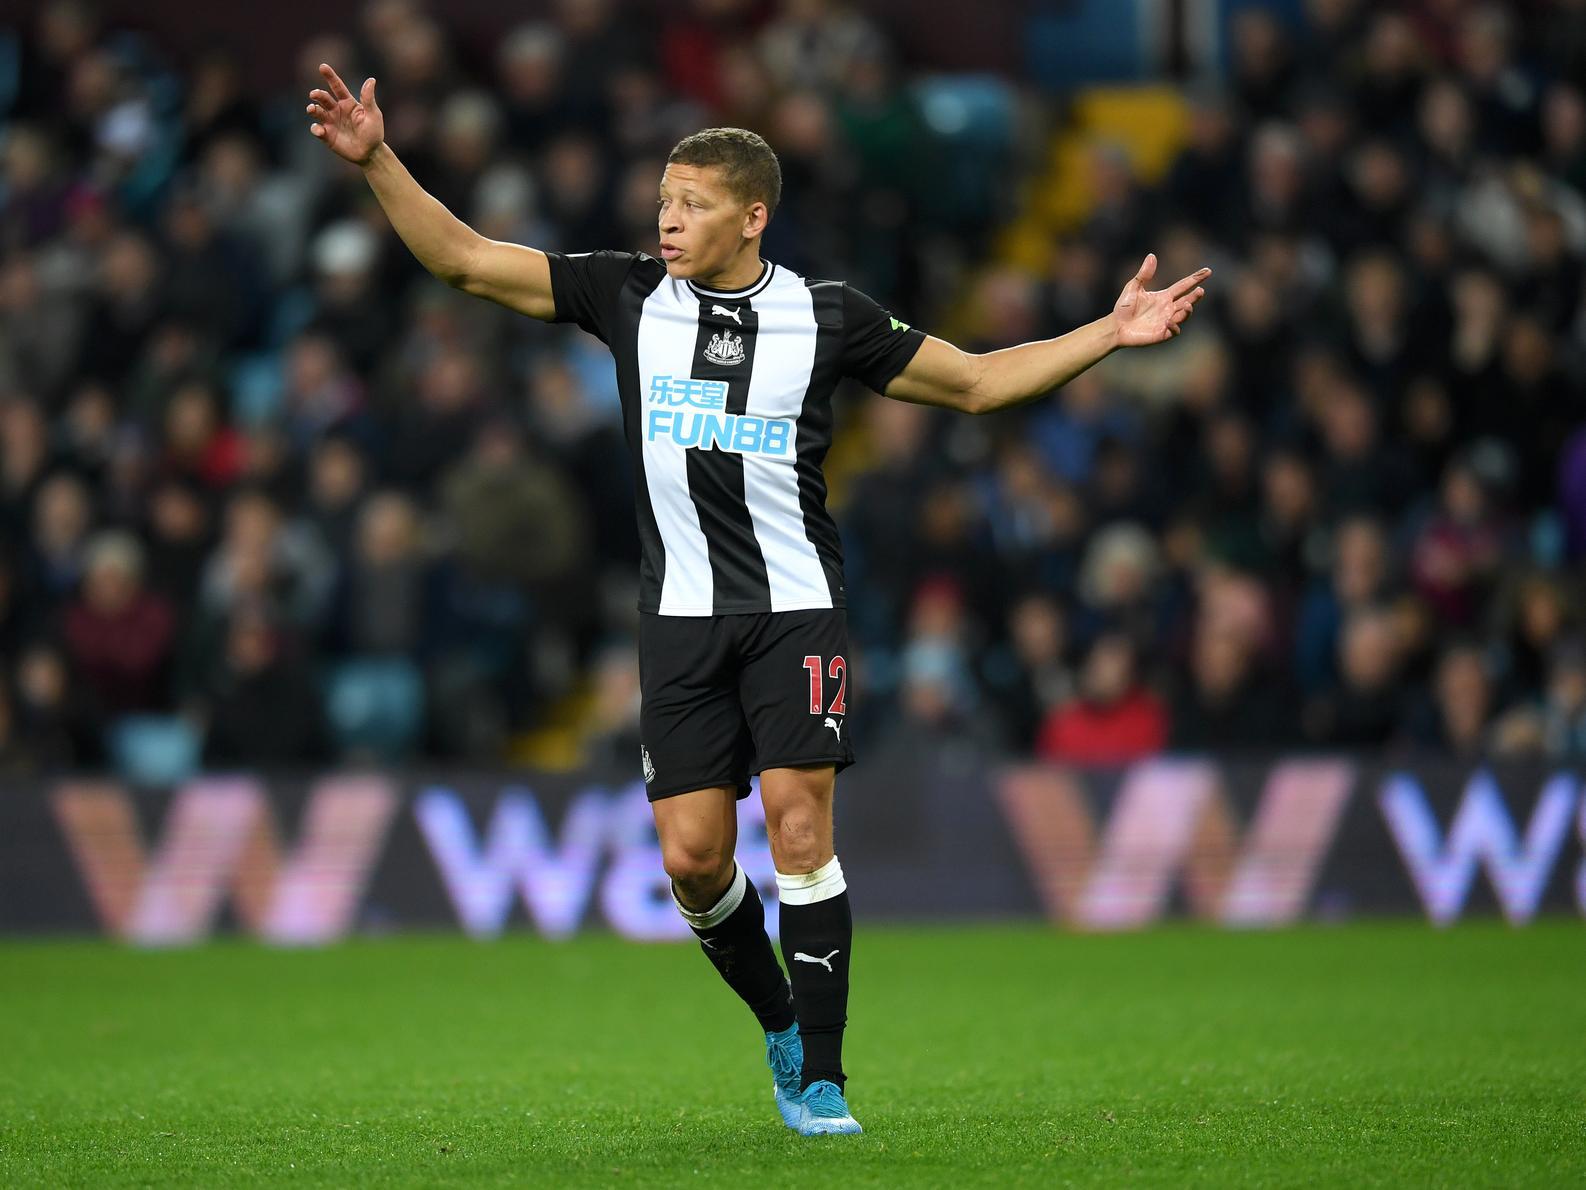 Newcastle boss Steve Bruce has told Dwight Gayle that he will get the chance to impress this season. (Newcastle Chronicle)